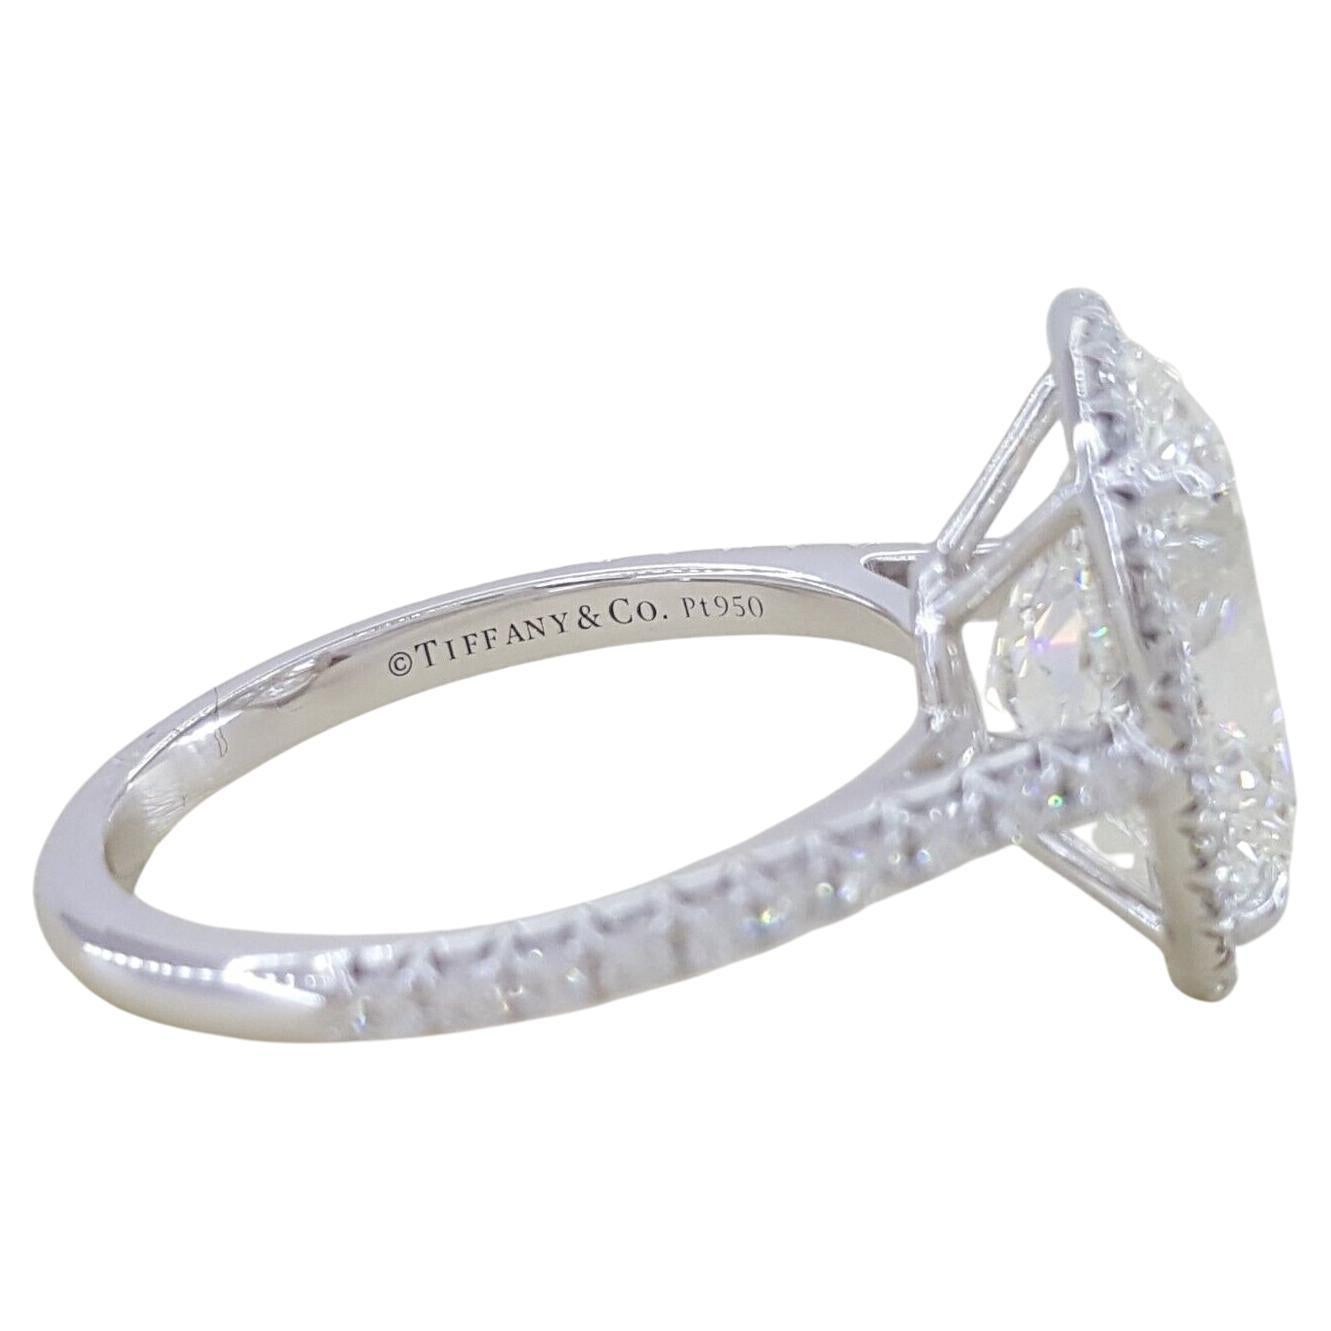 Tiffany & Co. 4.38 ctw Soleste Oval Brilliant Cut Diamond Platinum Halo Engagement Ring.

The ring weighs 5 grams, size 6, the center is a Natural Oval Brilliant Cut diamond weighing 4.06 ct, H in Color, VVS1 in Clarity w/ Specifications: 12.39 x